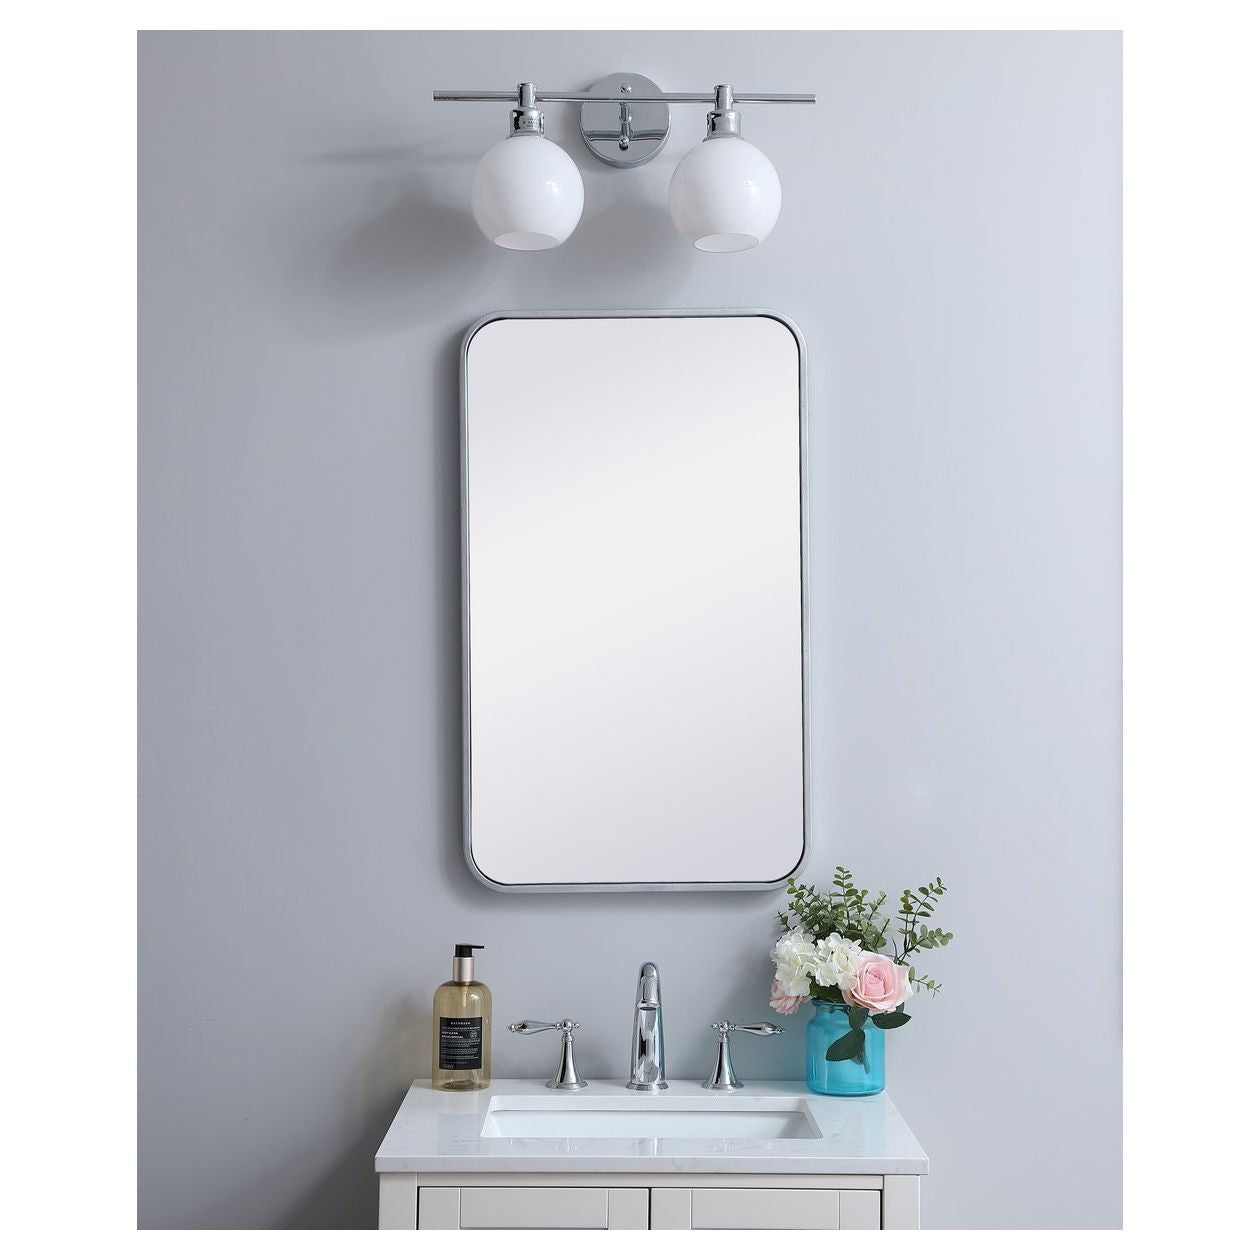 MR801830S Evermore 18" x 30" Metal Framed Rectangular Mirror in Silver